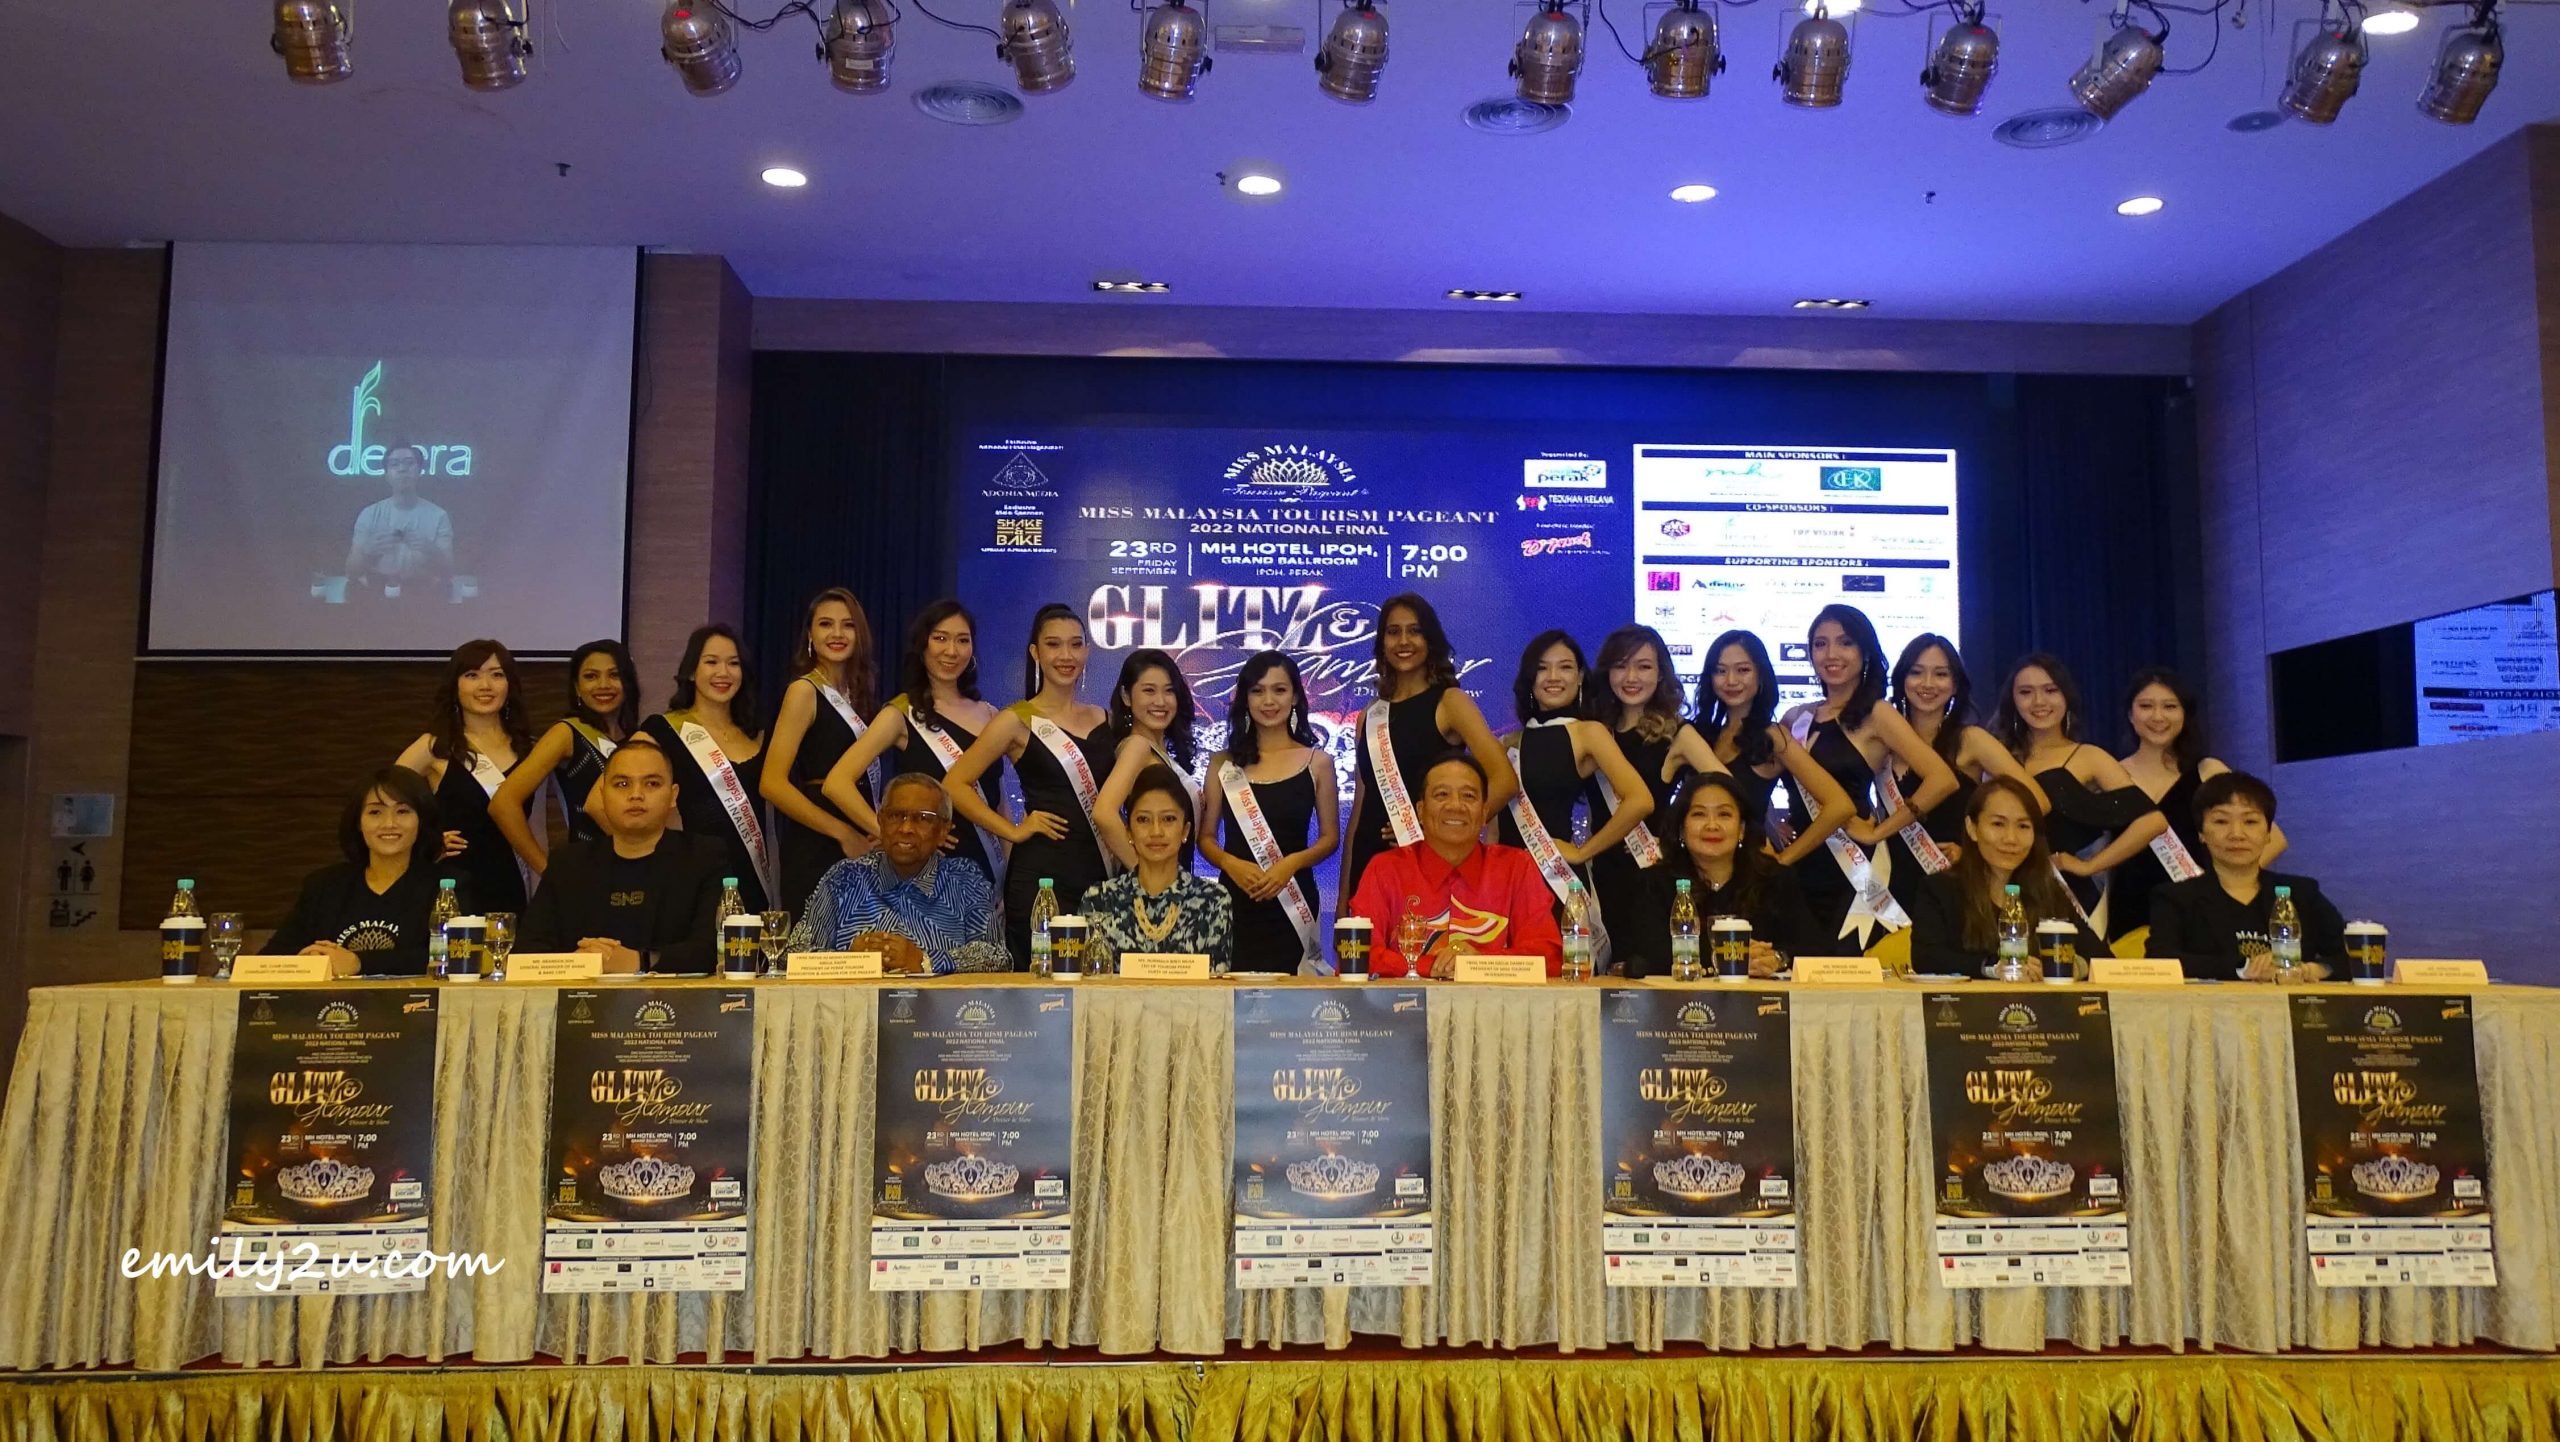 Tan Sri Datuk Danny Ooi (in red) with Adonia Media Sdn. Bhd. (Exclusive National Final Organiser) and the 16 finalists of Miss Malaysia Tourism Pageant 2022